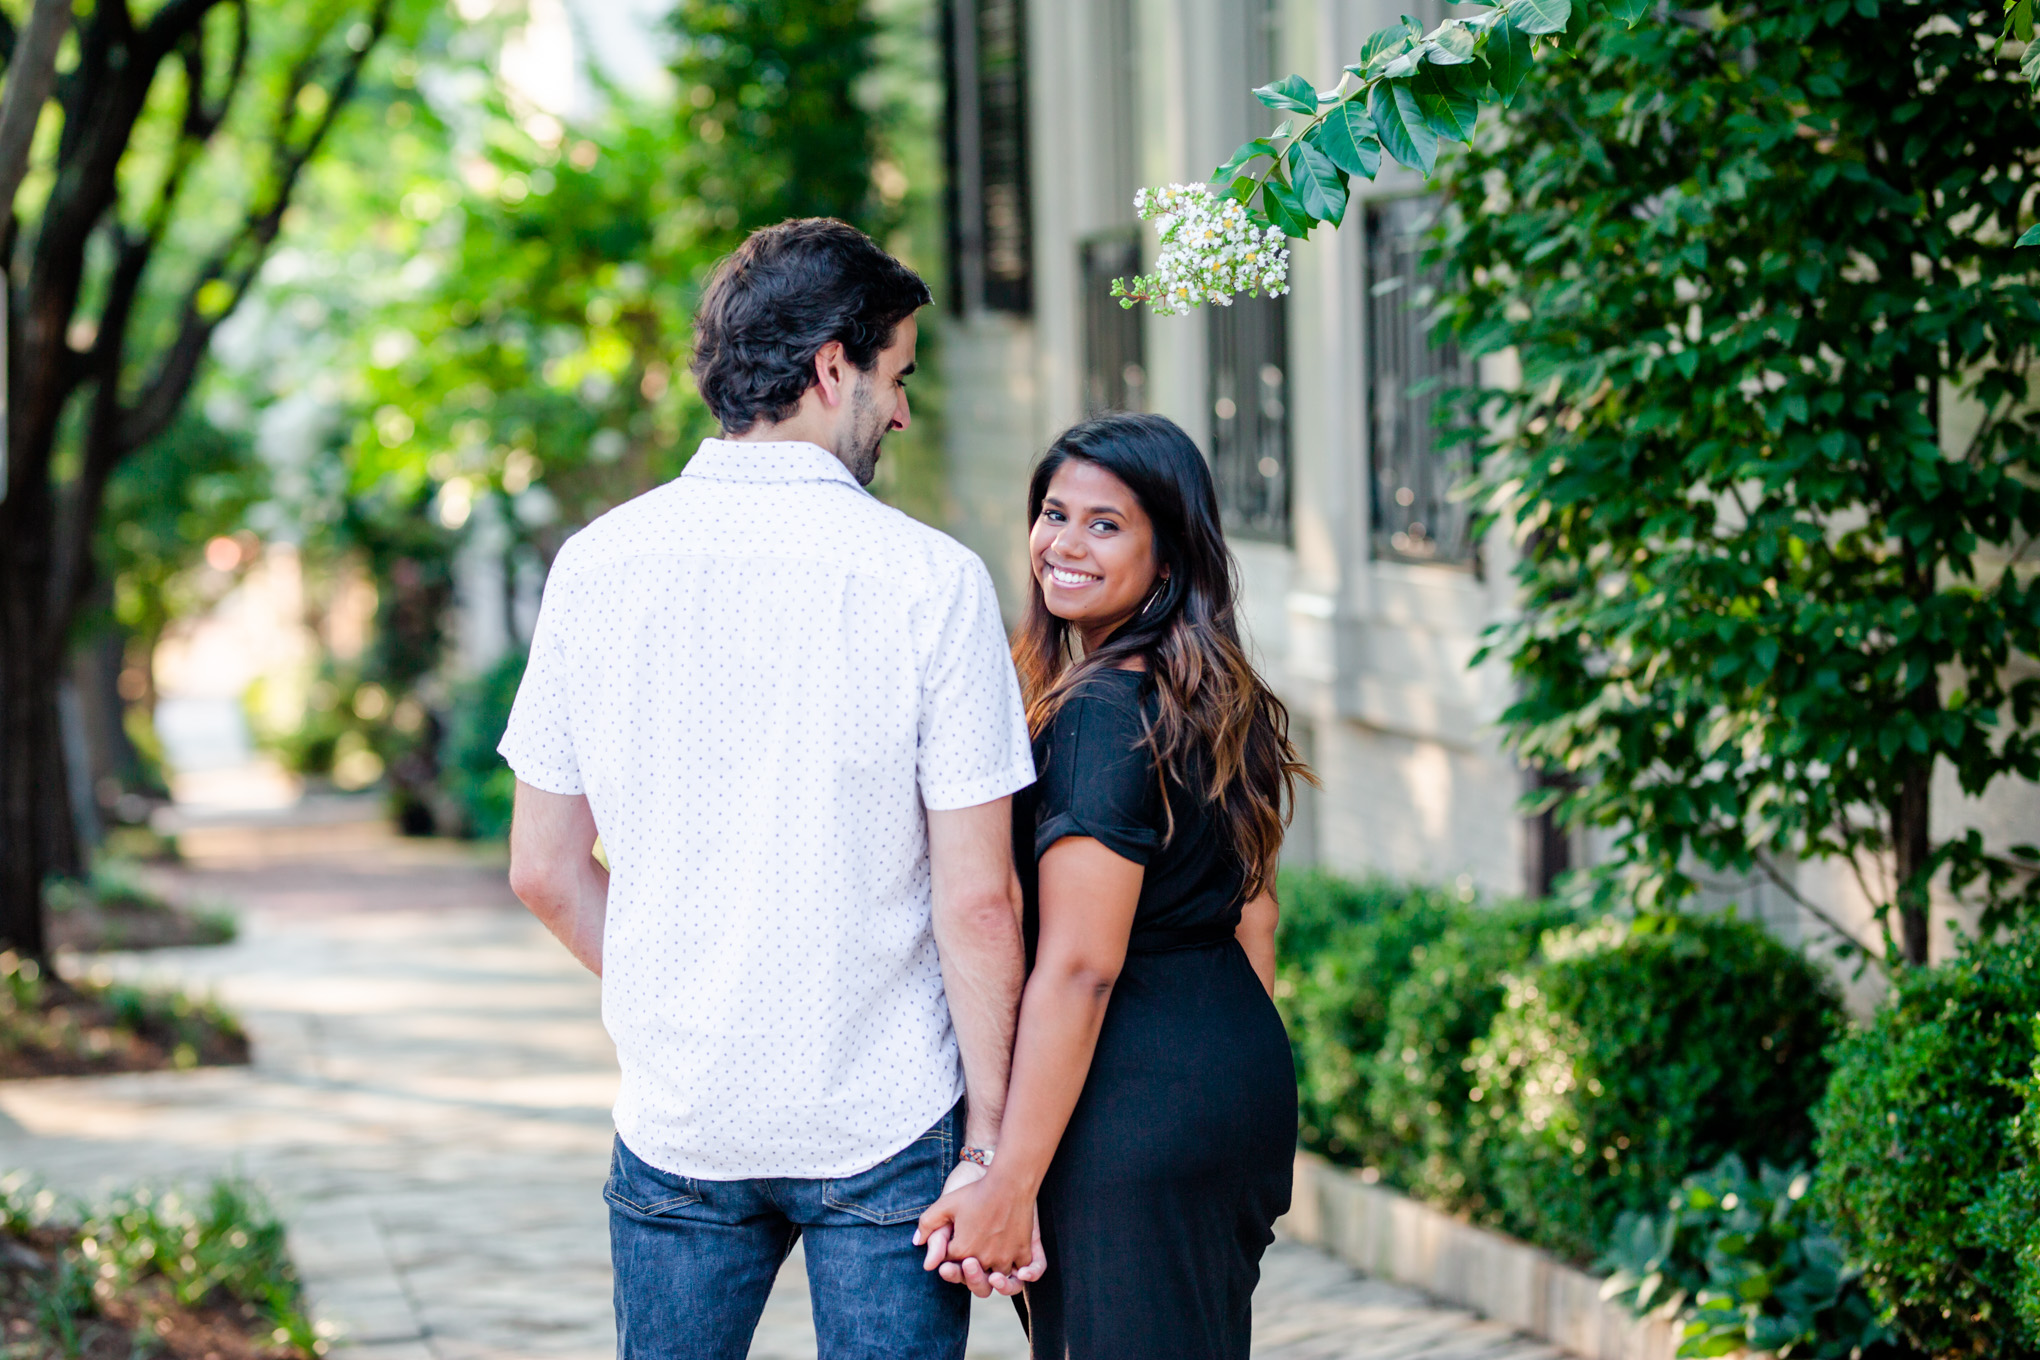 Old Town Alexandria engagement photos, Alexandria engagement photos, Old Town Alexandria photos, Old Town Alexandria, Alexandria engagement photos, Alexandria Virginia, classic engagement photos, historic town engagement photos, engagement photos, Rachel E.H. Photography, engaged couple